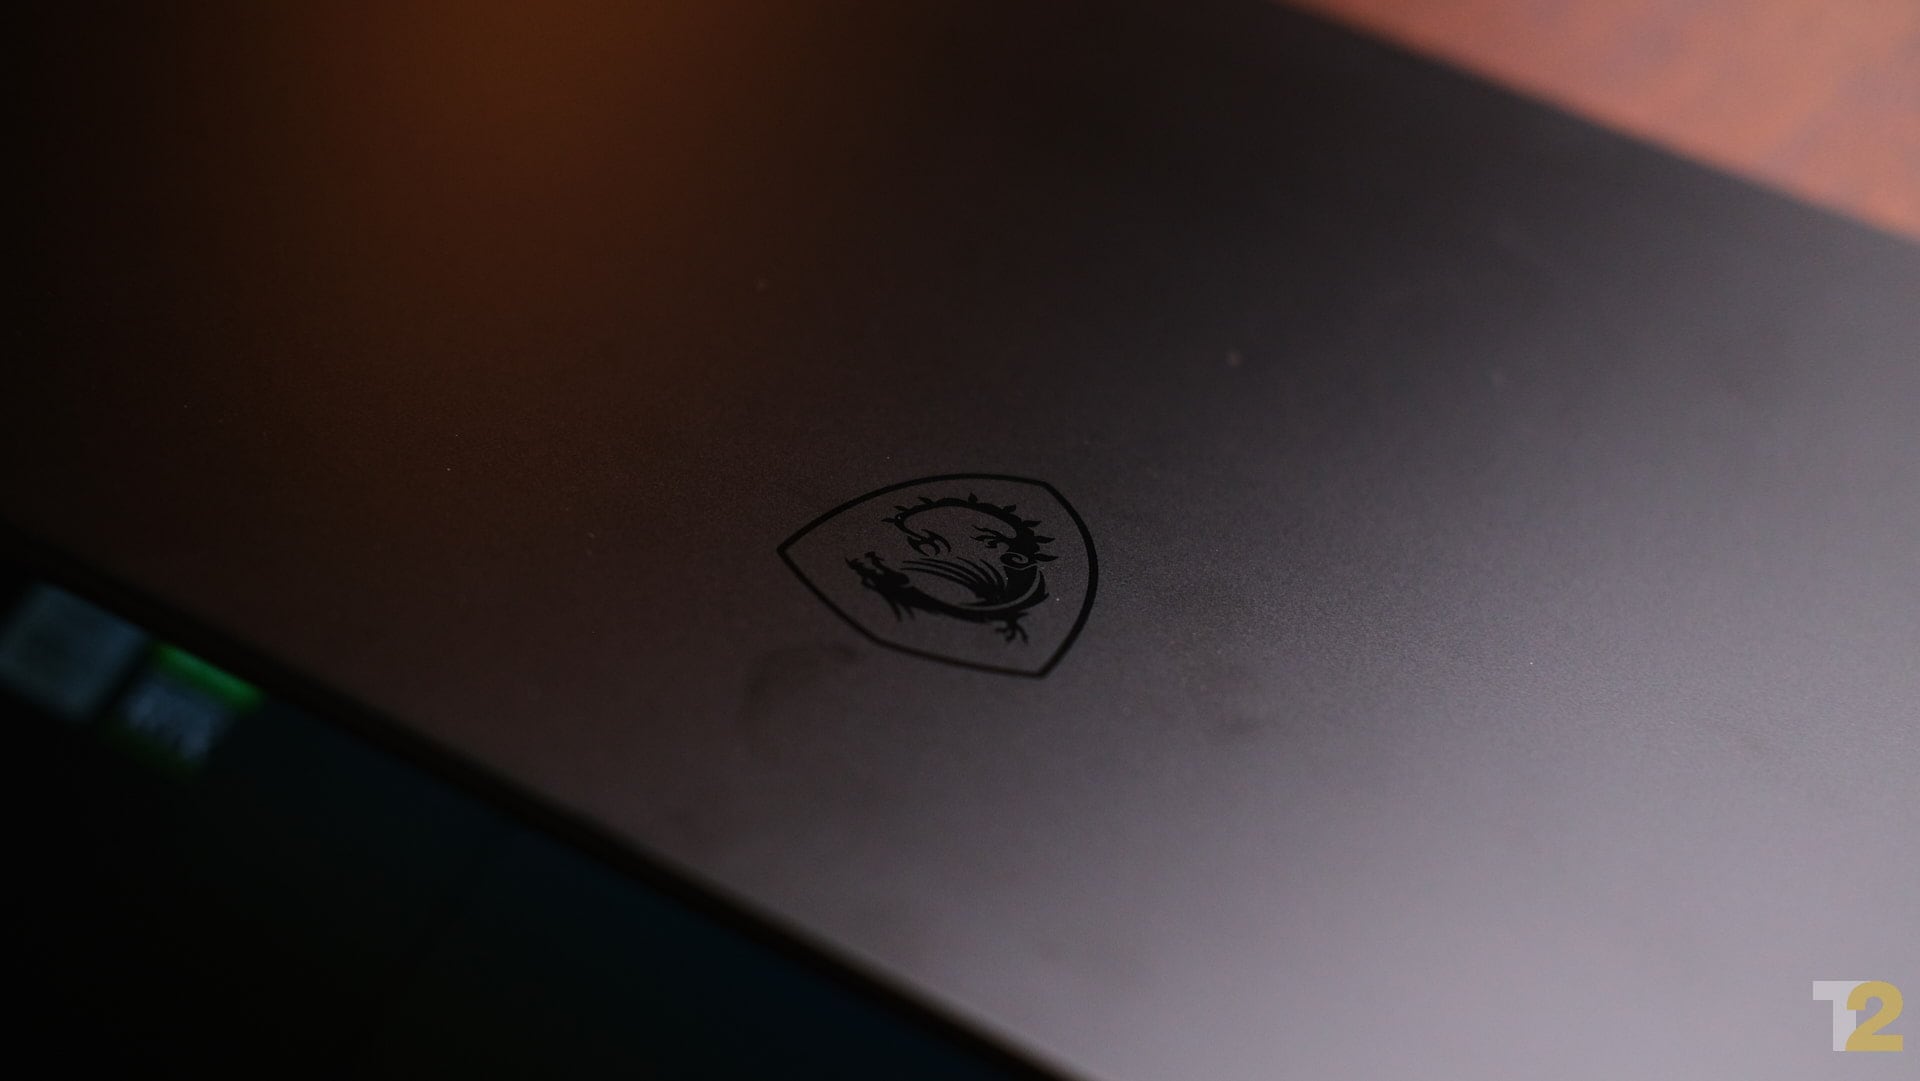 This is a decent laptop, but the design is getting long in the tooth. Image: Anirudh Regidi